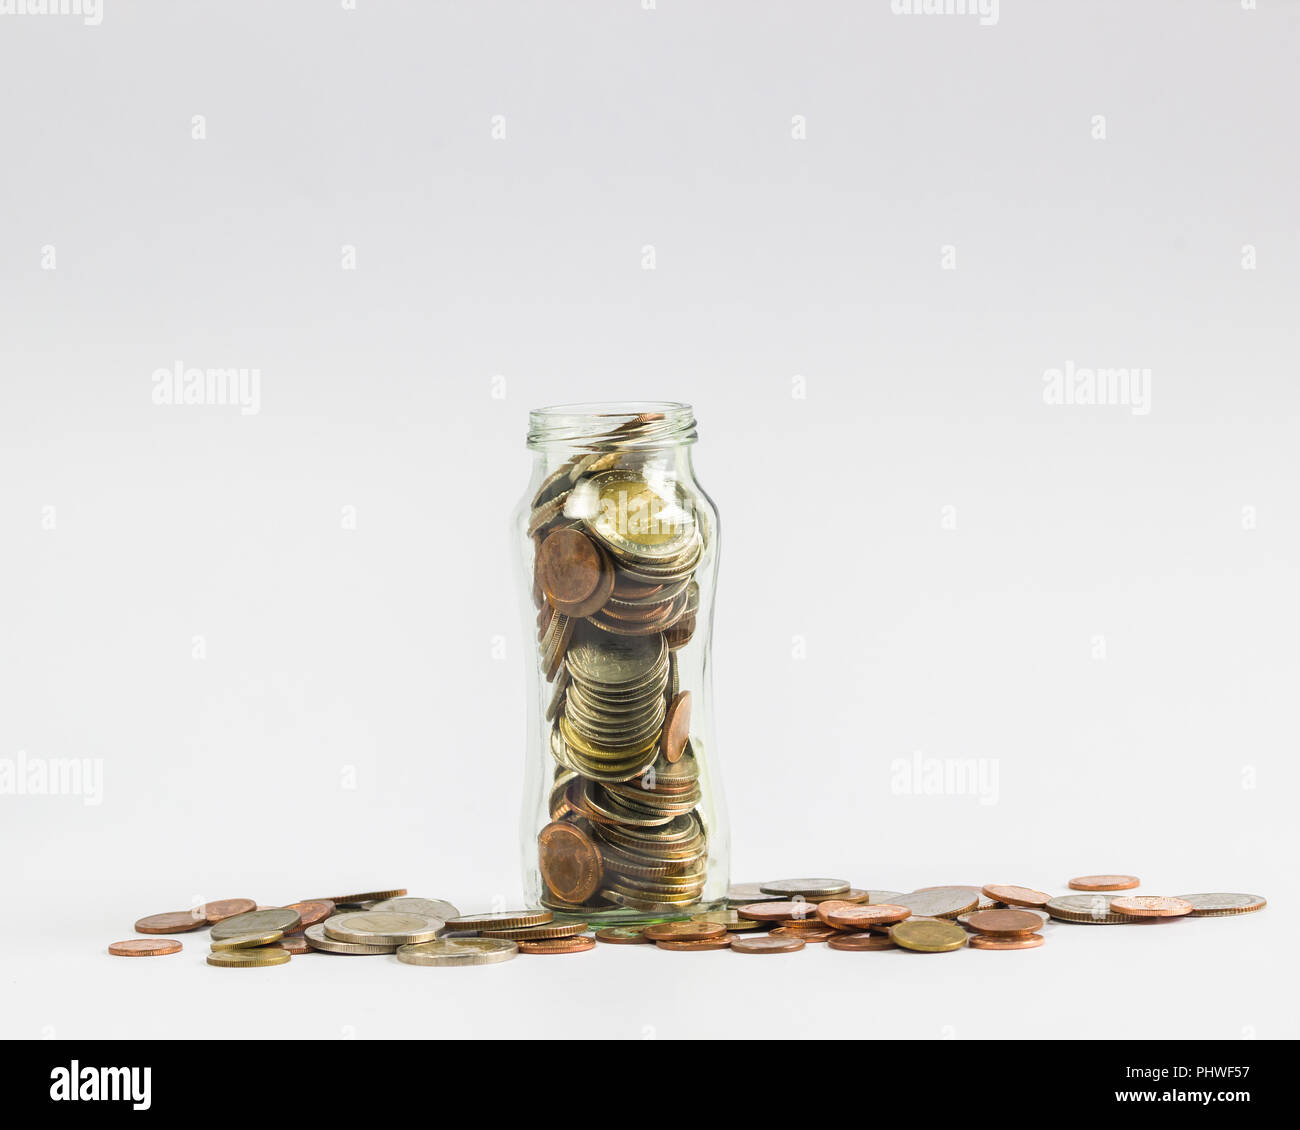 Savings, Investment growing money concept : A full coins in a clear glass jar with many coin on white background. Stock Photo